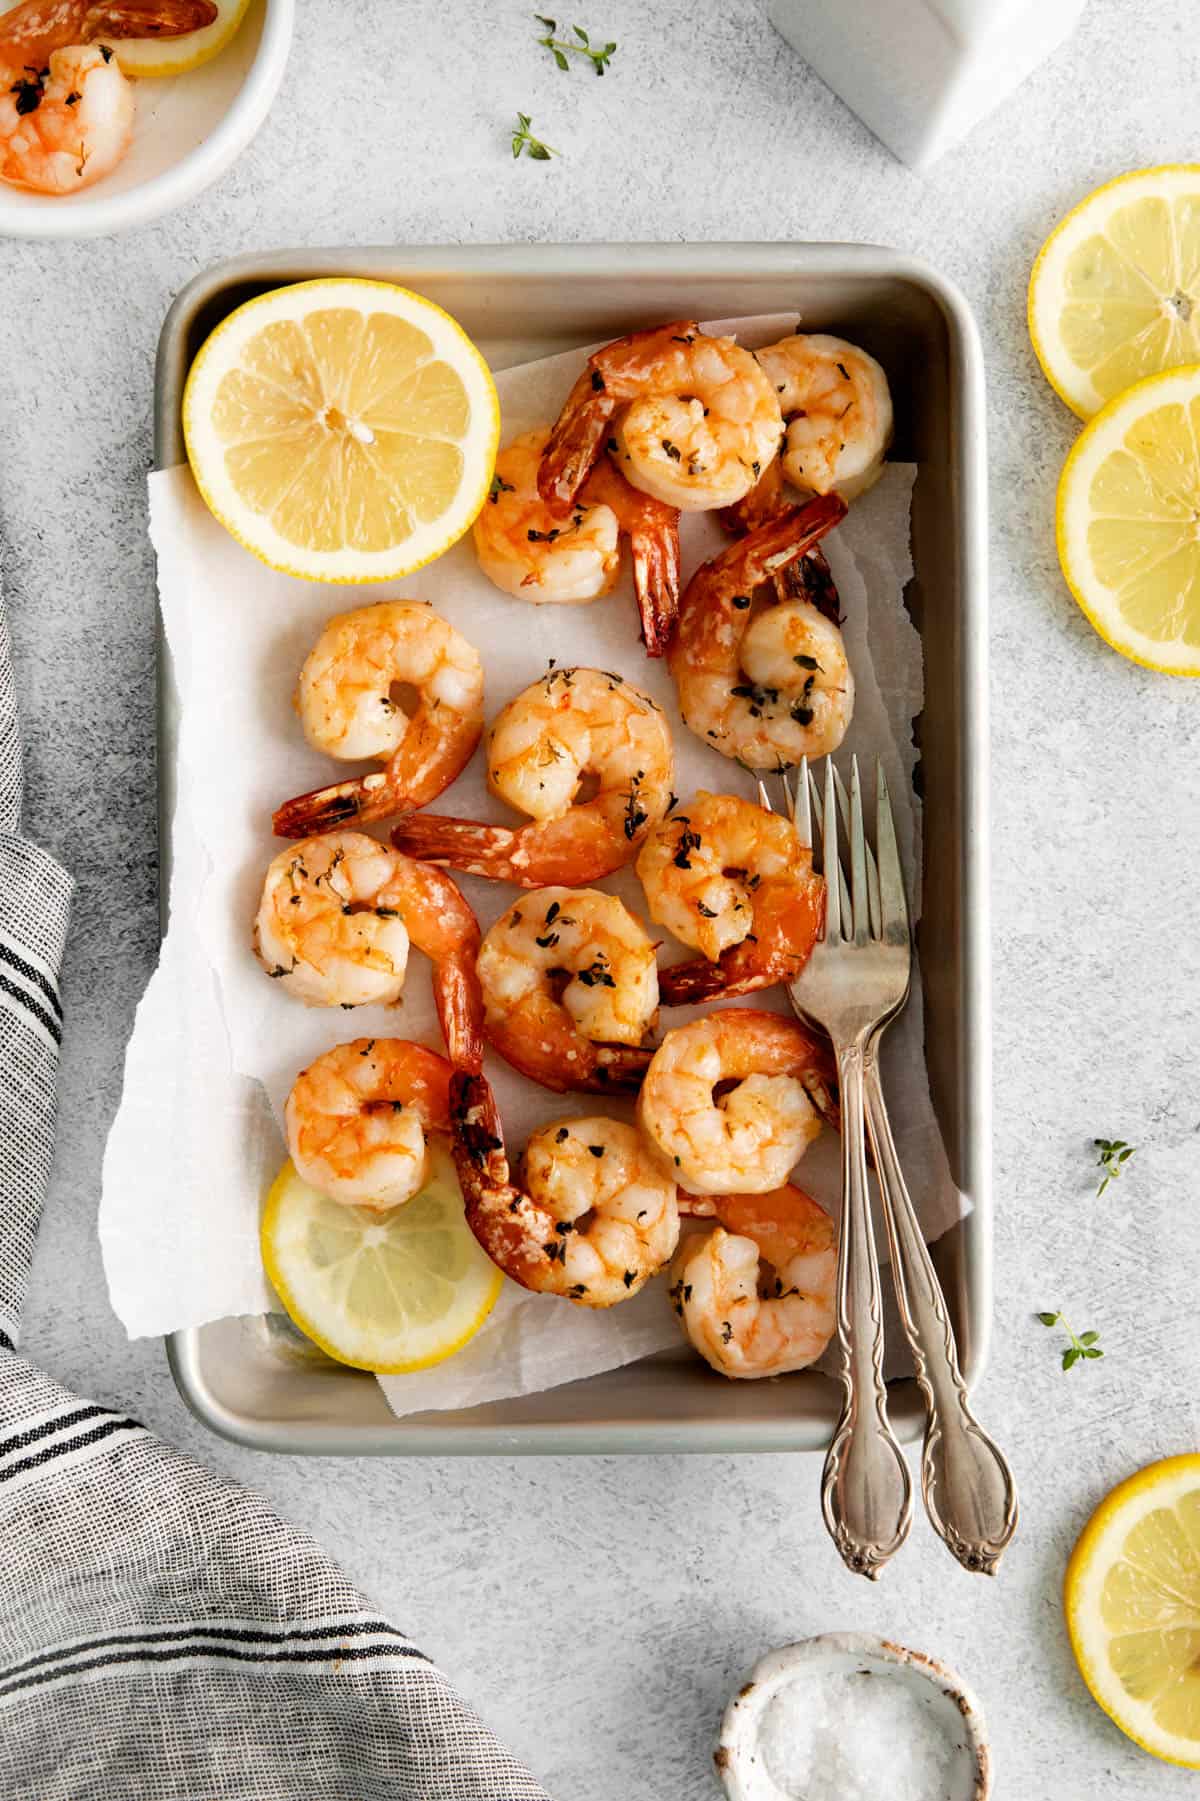 Cooked shrimp on a baking sheet with forks.